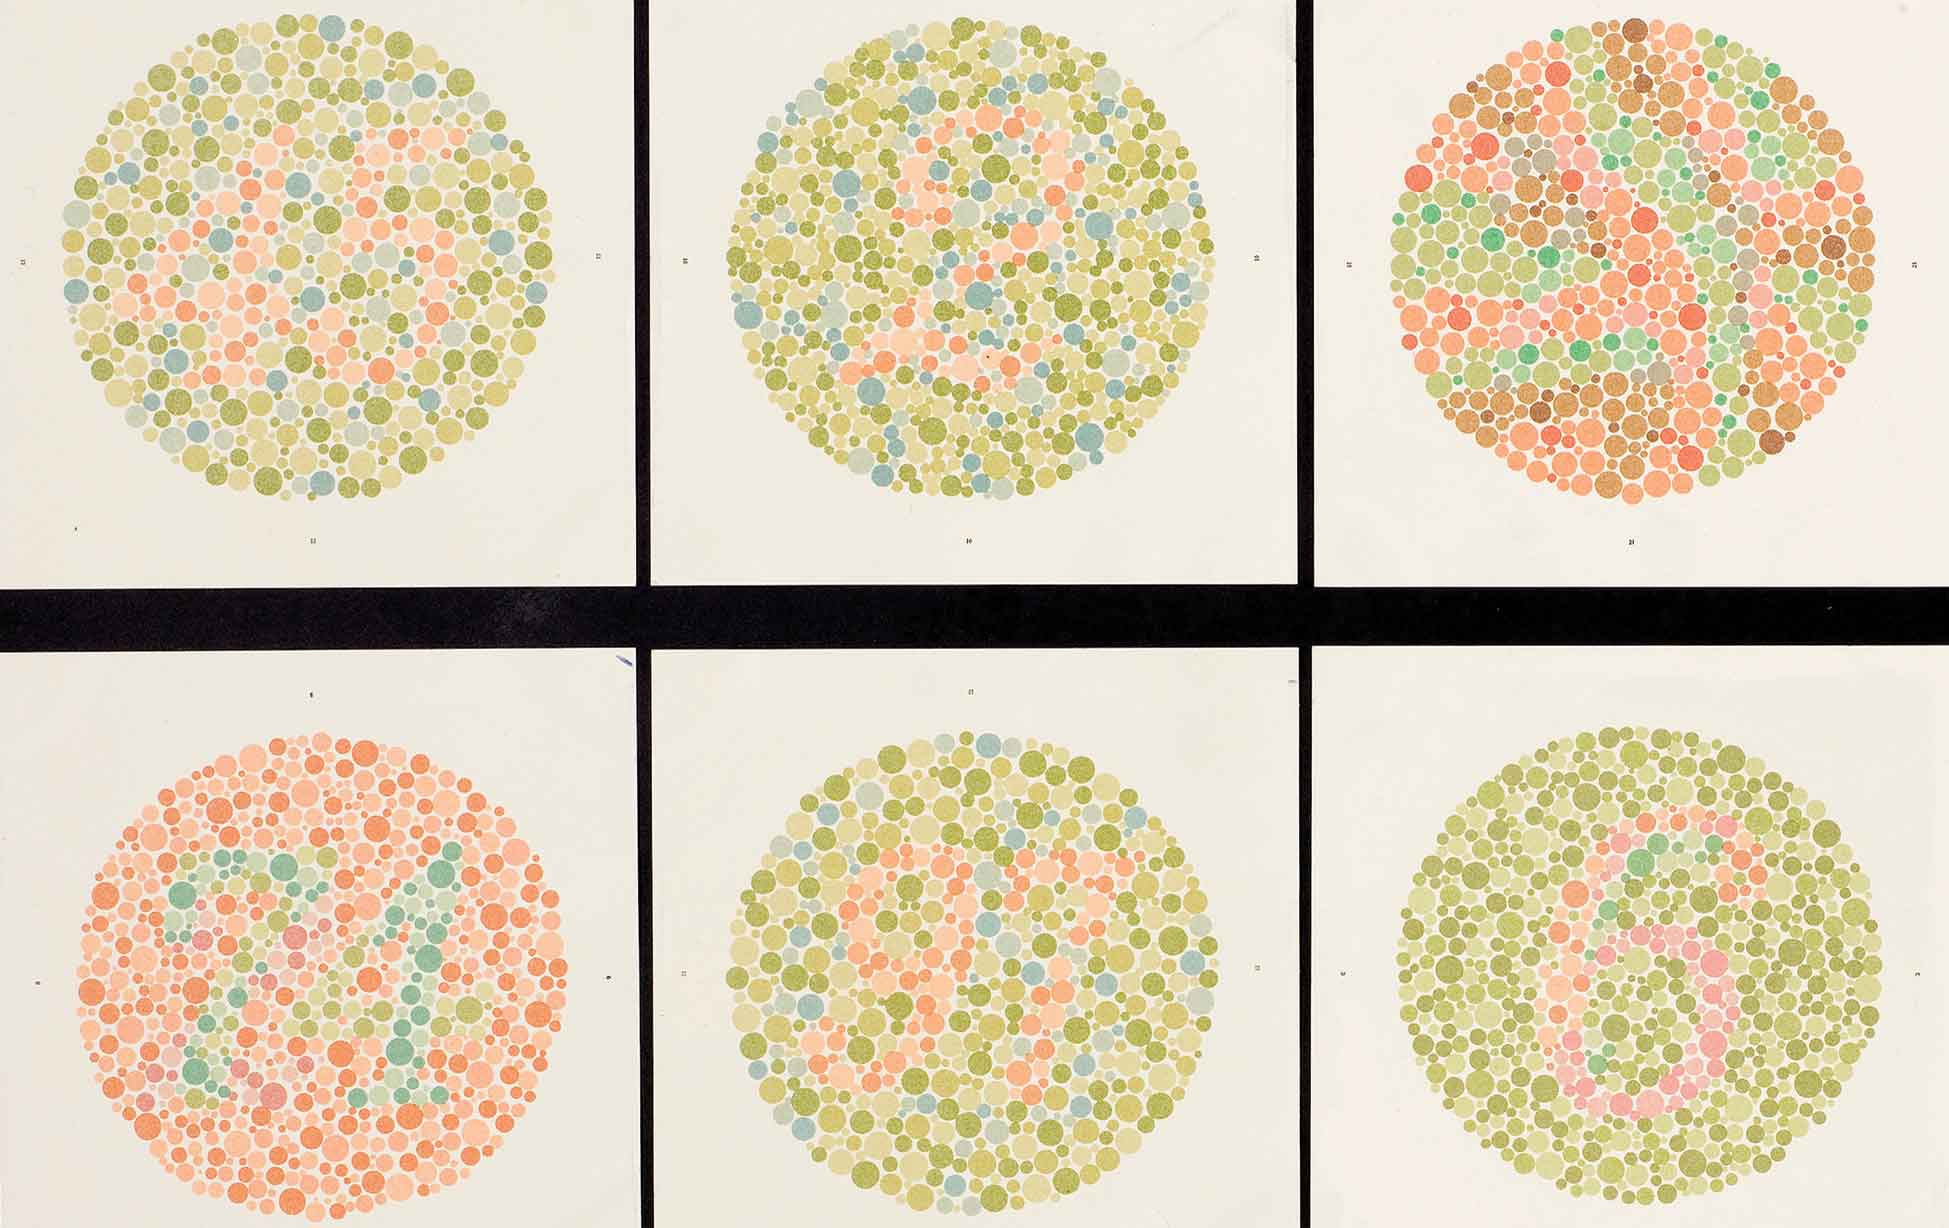 Who Gets to Be ColorBlind? The Nation